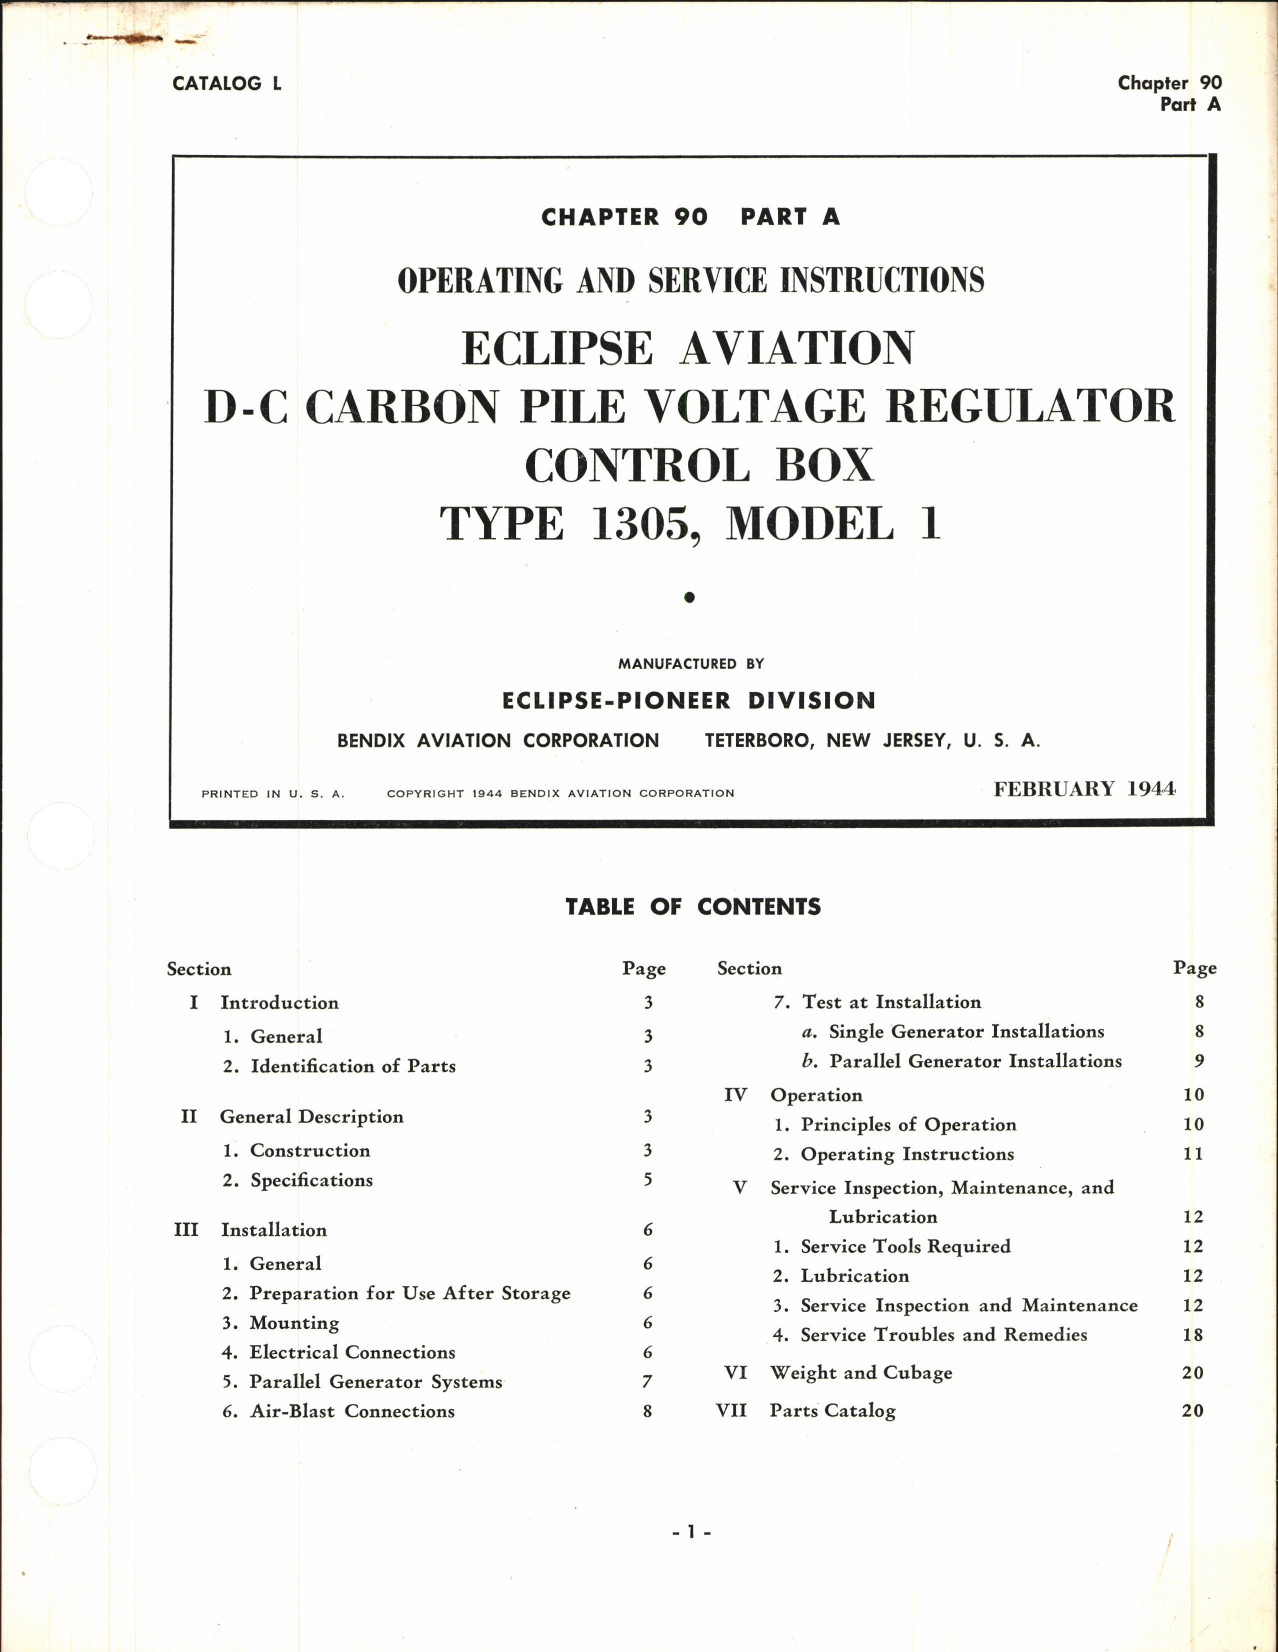 Sample page 1 from AirCorps Library document: Operating and Service Instructions for D-C Carbon Pile Voltage Regulator Control Box Type 1305, Model 1